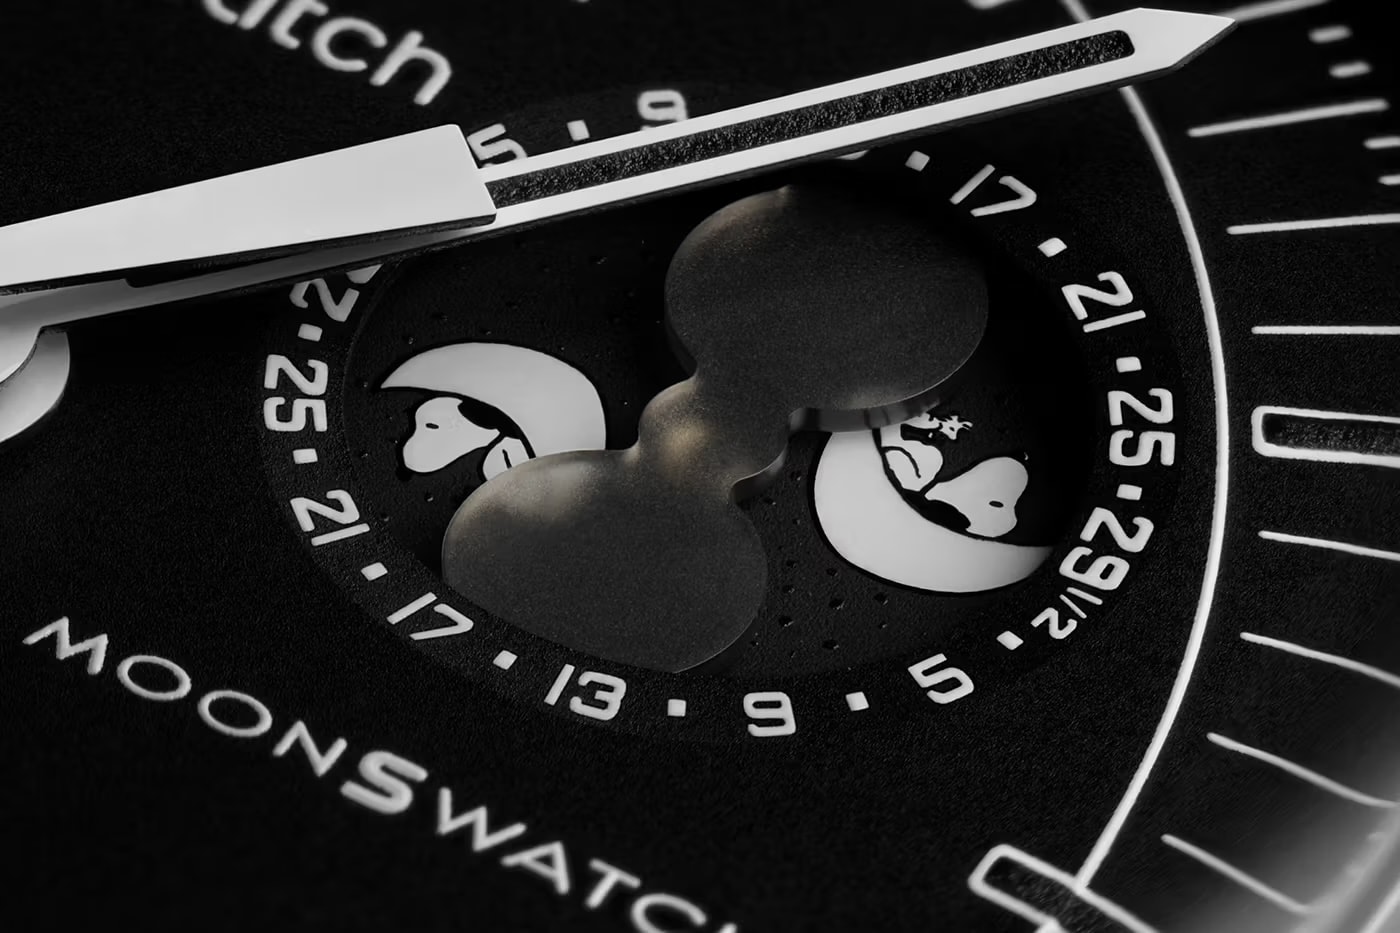 OMEGA x Swatch 最新 Bioceramic MoonSwatch 新作「MISSION TO THE MOONPHASE」正式登場